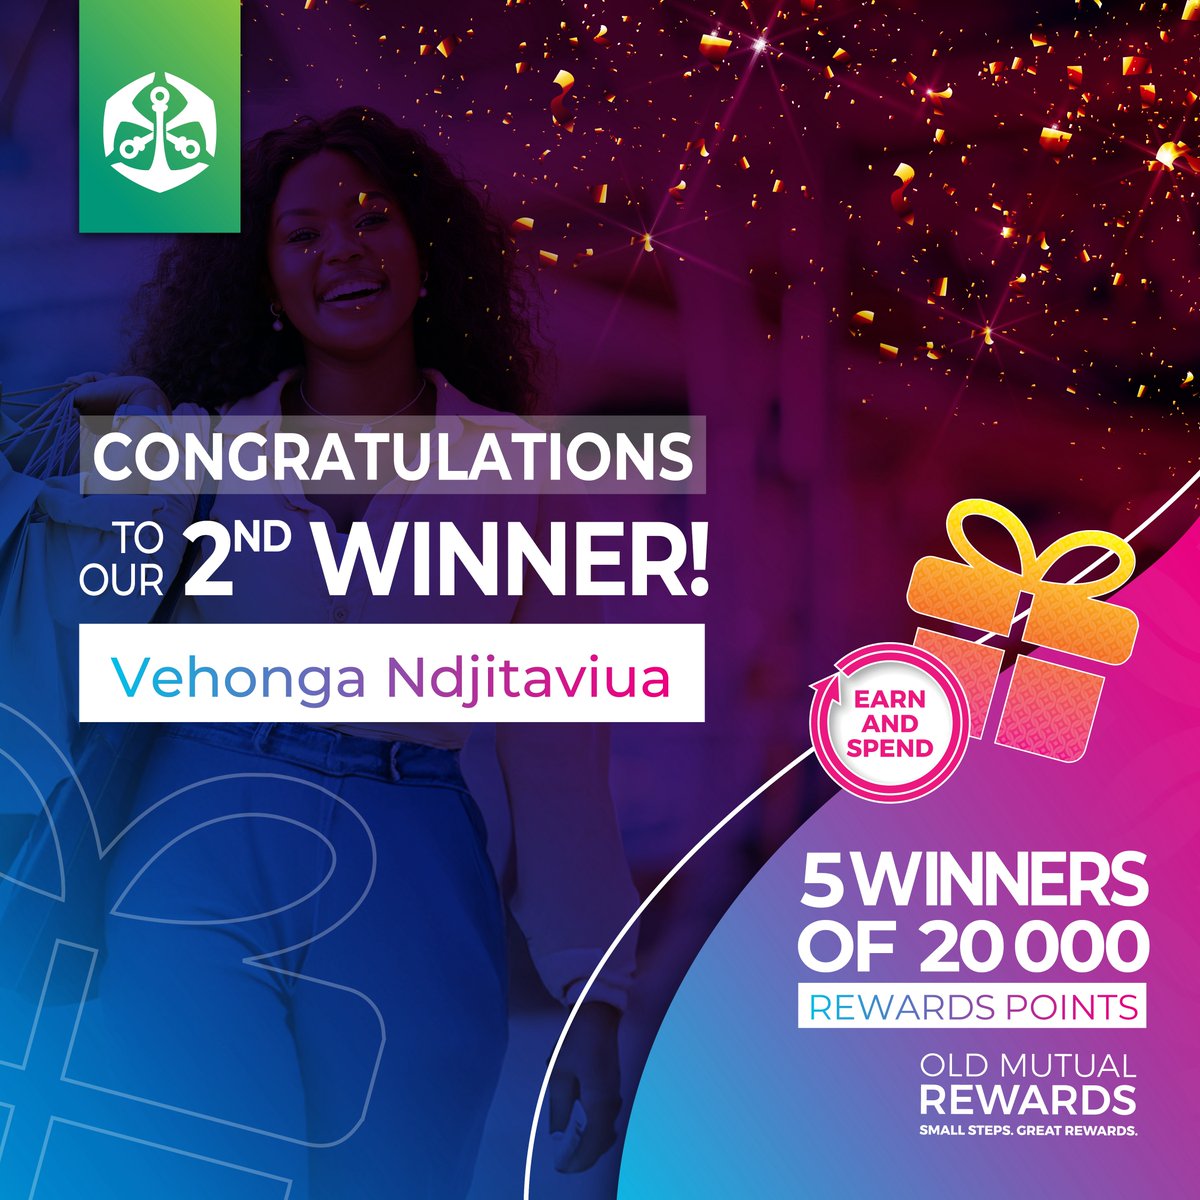 🎊 It's time to celebrate our second lucky winner! 🌟 With 20 000 rewards points in your pocket, courtesy of Old Mutual Rewards, the possibilities are endless! 💼 Stay tuned for instructions on claiming your prize. #SignUptoWin #WinnerAnnouncement